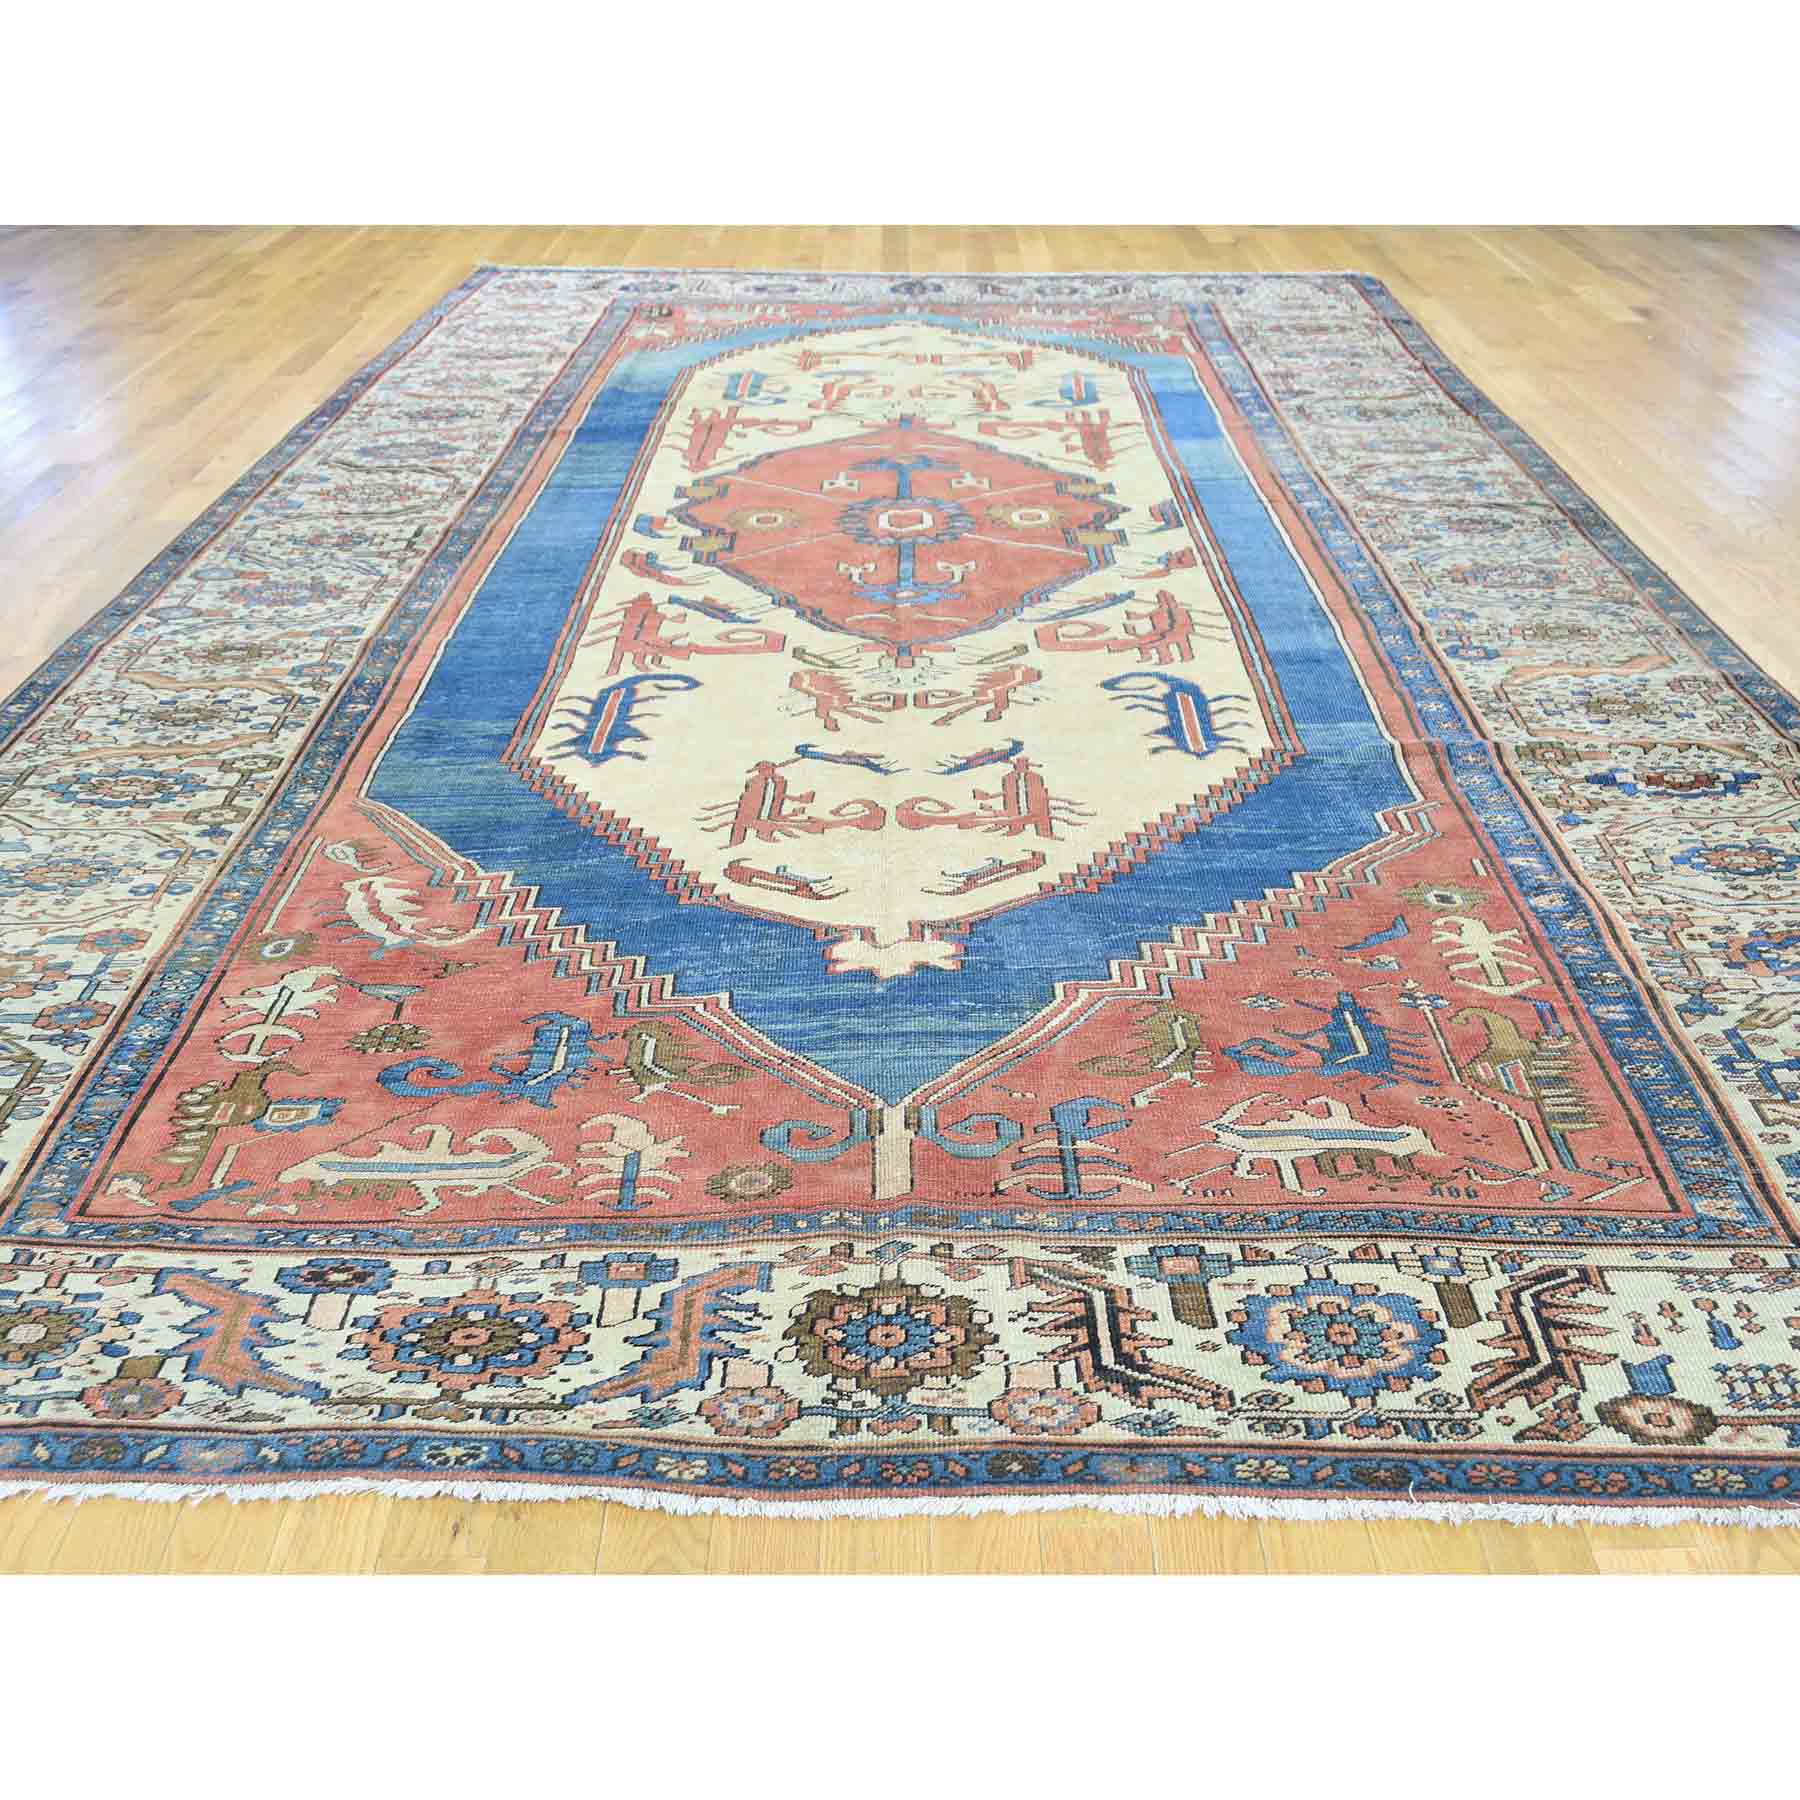 Antique-Hand-Knotted-Rug-172135